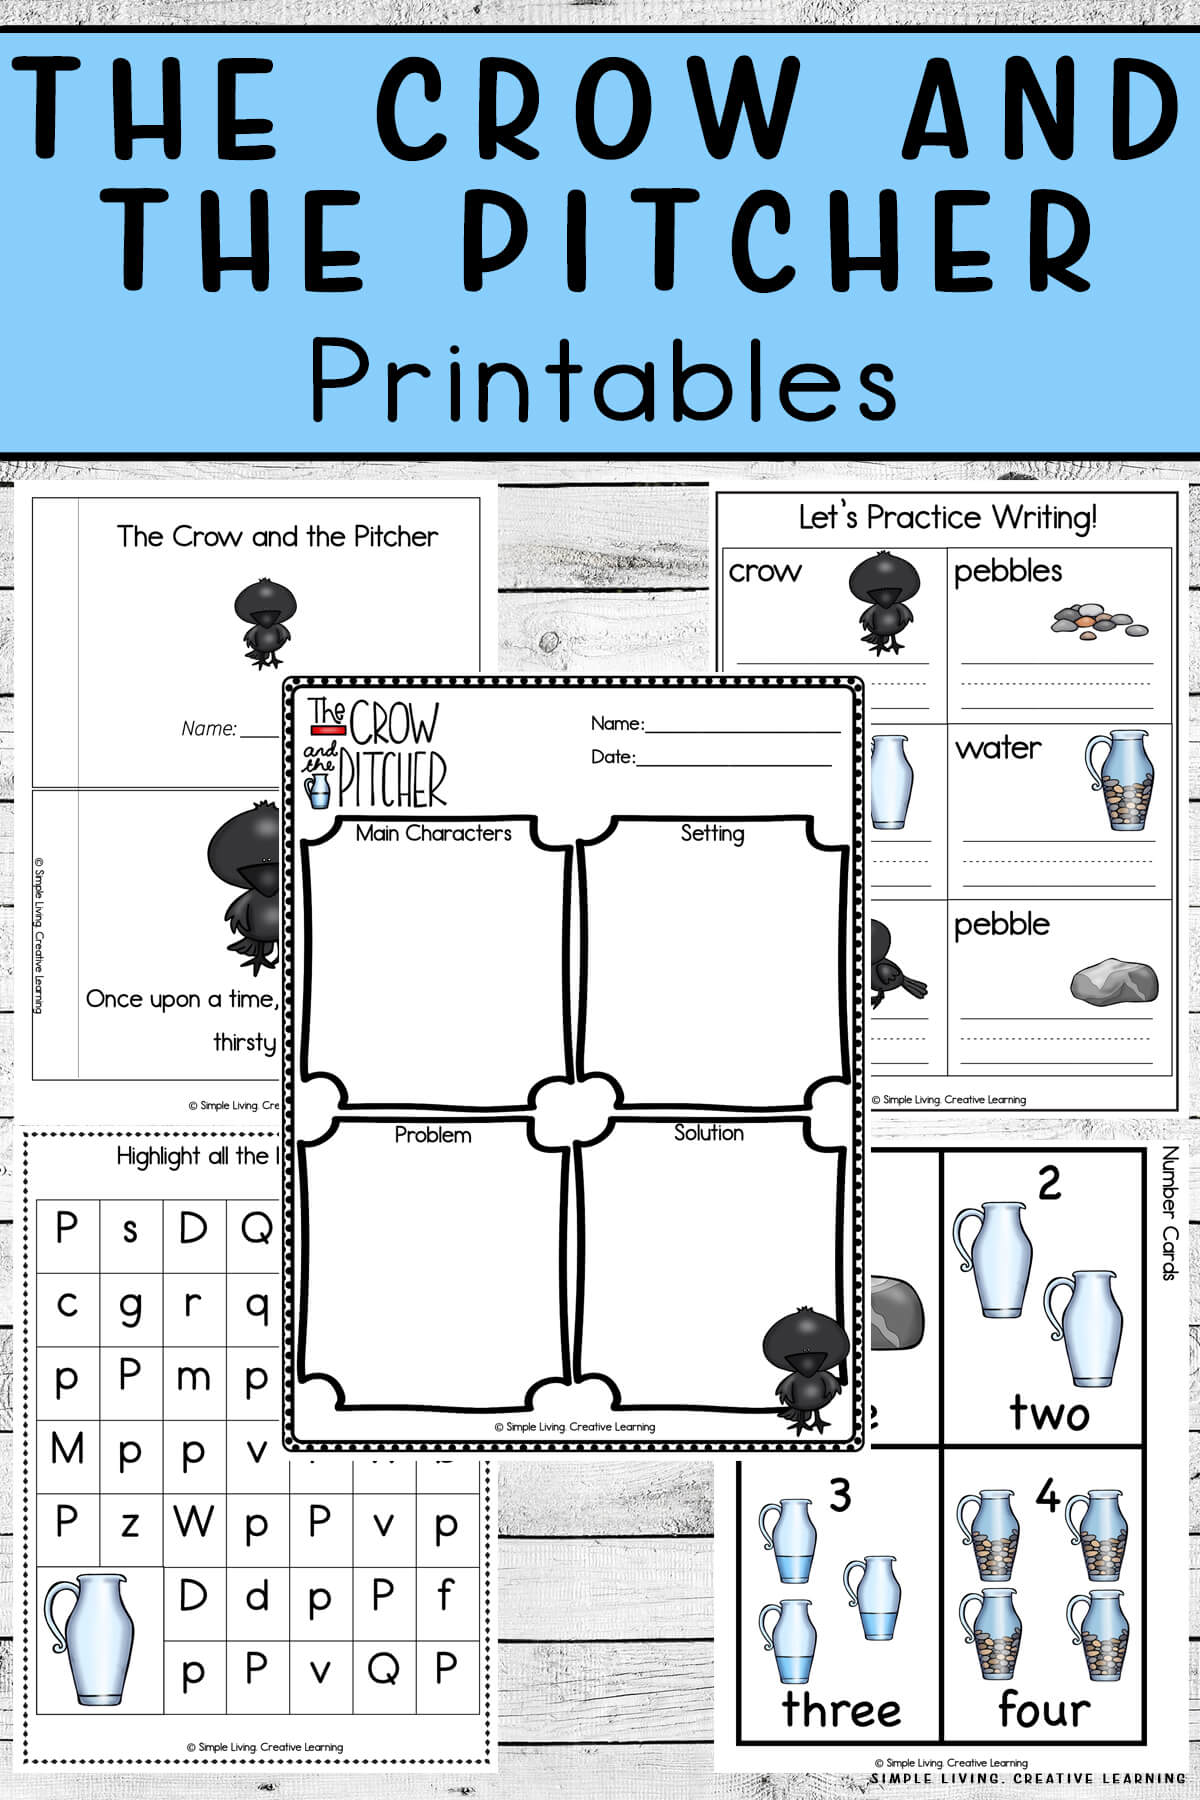 The Crow and the Pitcher Printables